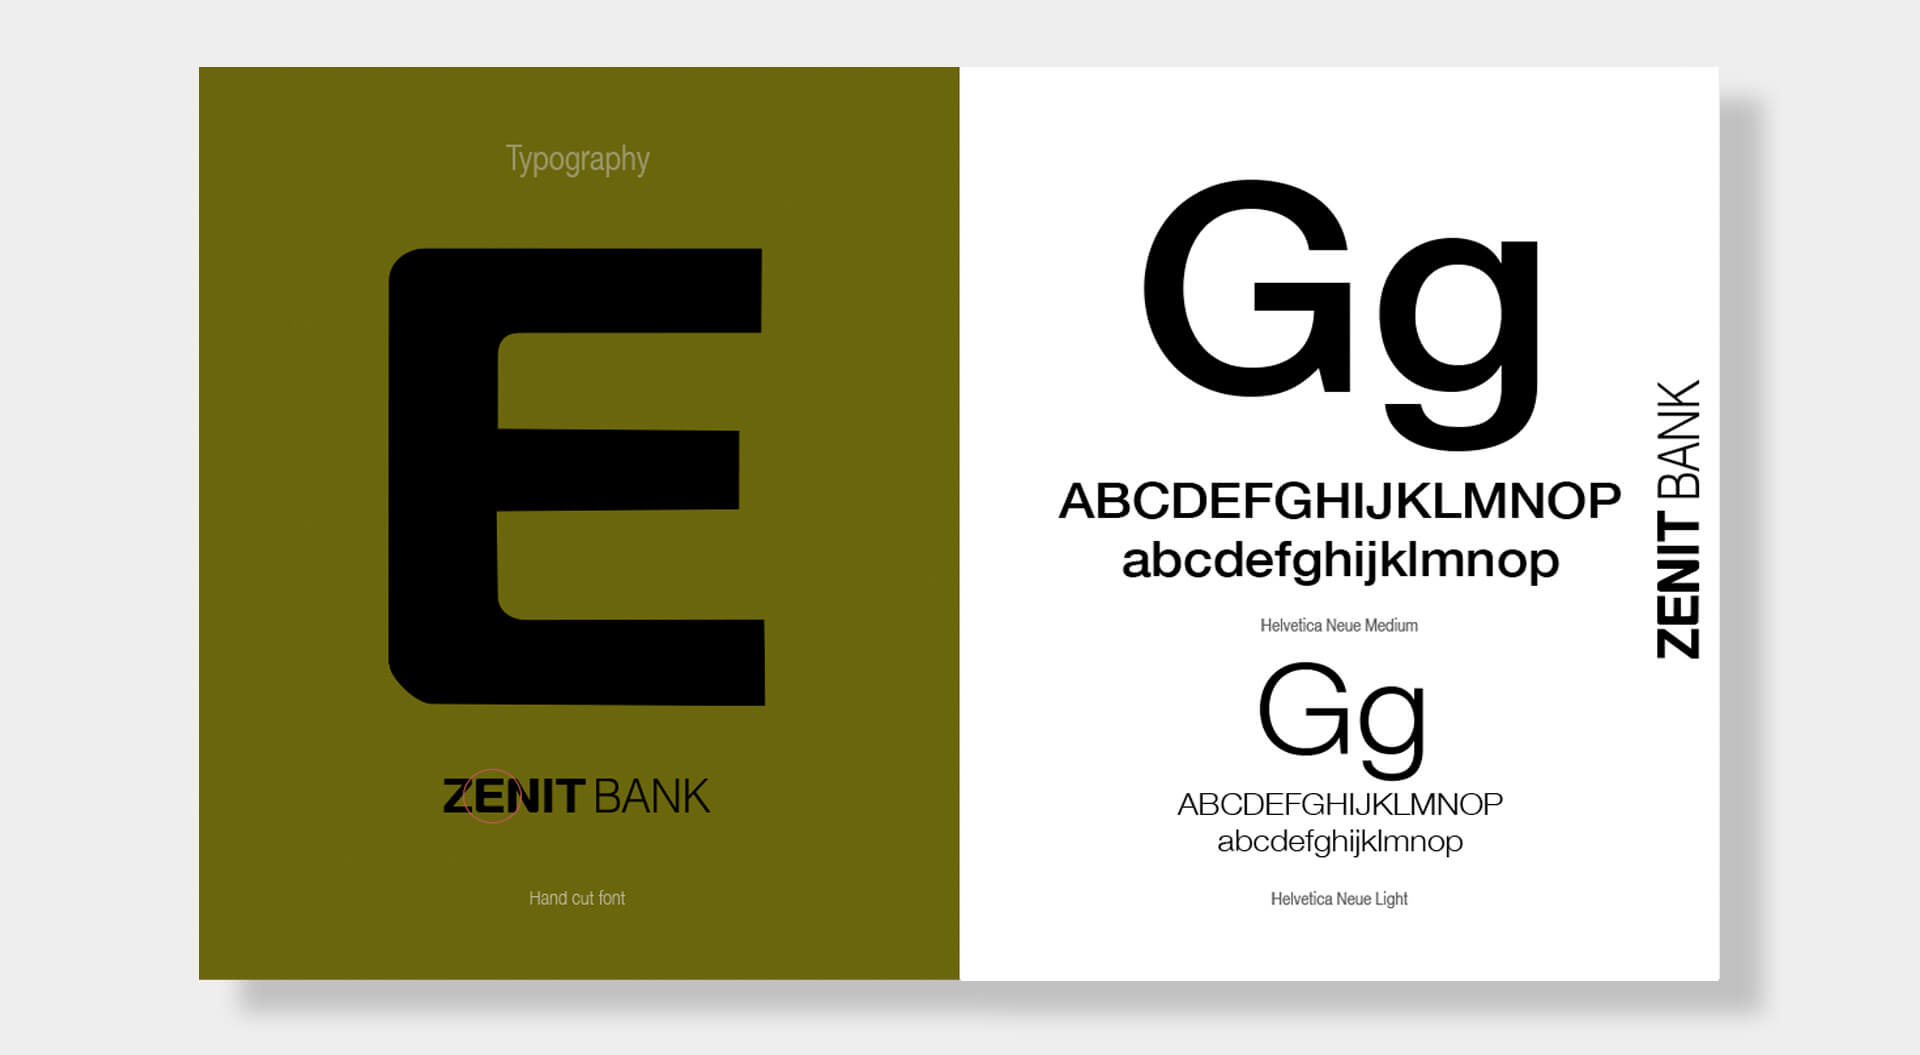 Zenit Bank Russia, Brand Typography, Graphic Communications for the Brand Manual - CampbellRigg Agency